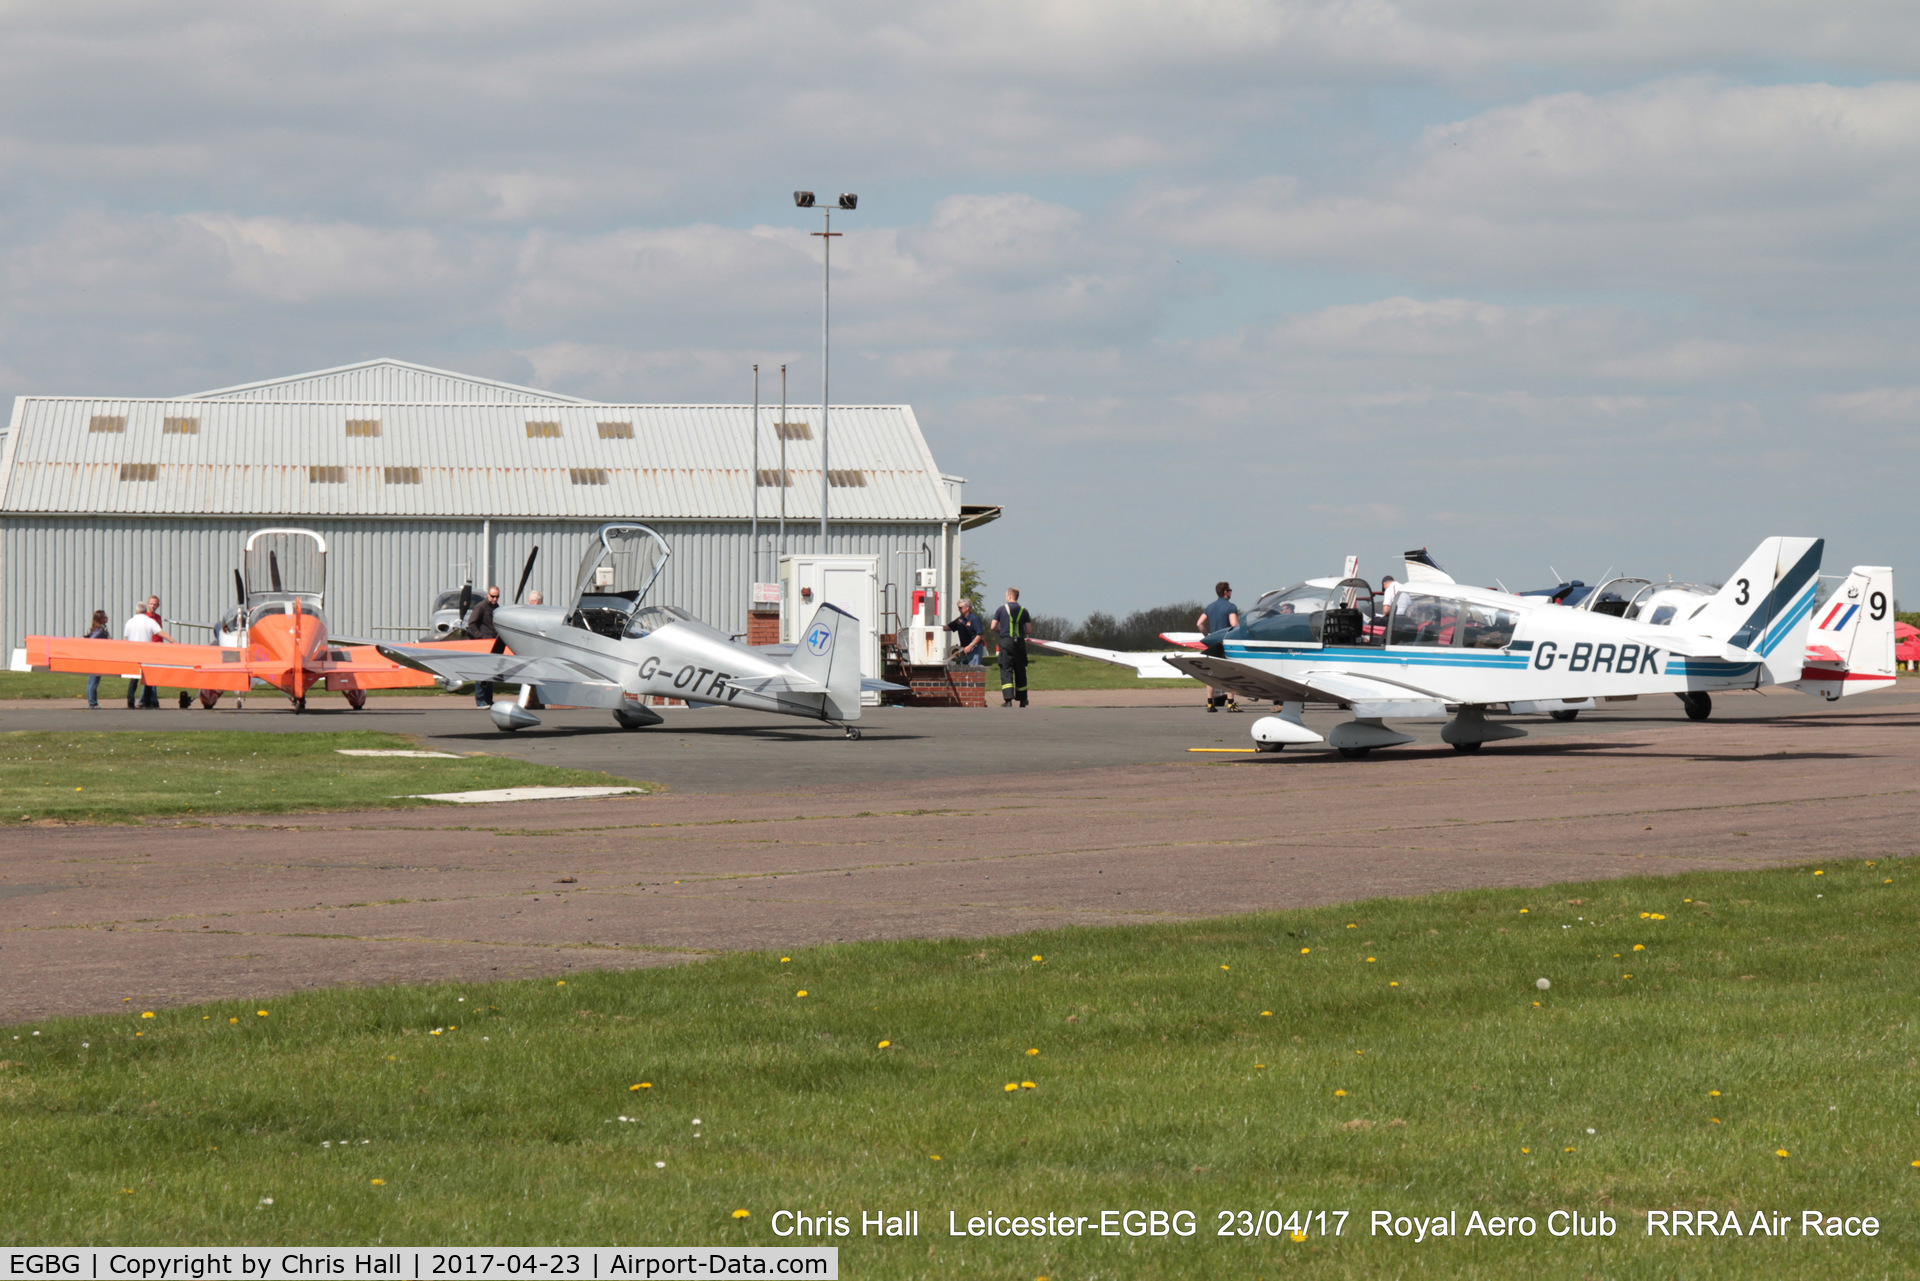 Leicester Airport, Leicester, England United Kingdom (EGBG) - Royal Aero Club 3R's air race at Leicester